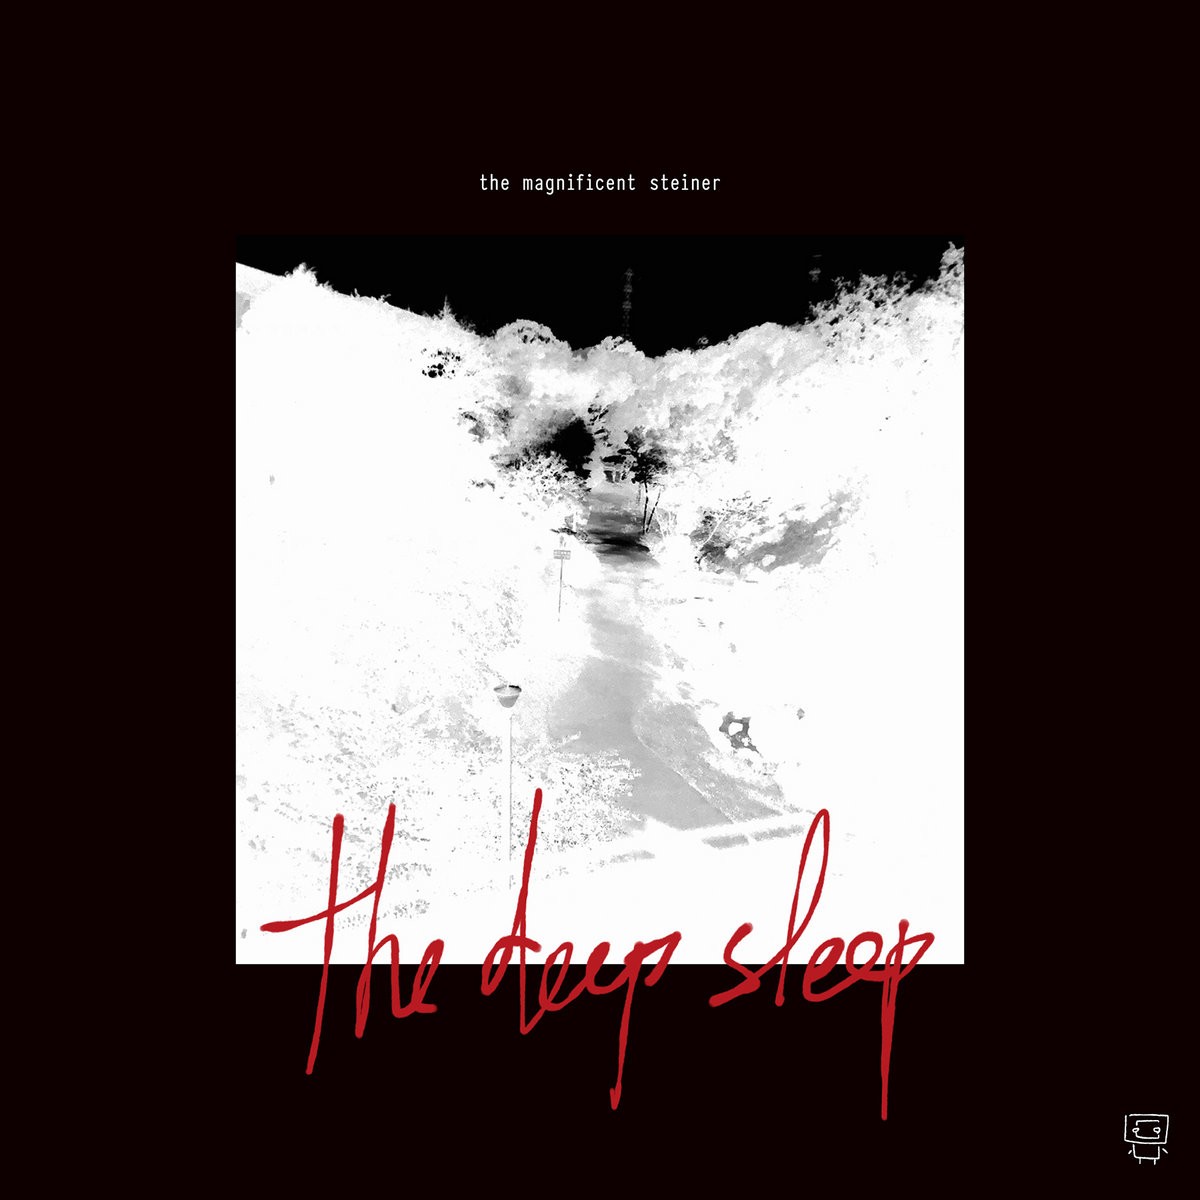 Release “the magnificent steiner” by the deep sleep - Cover Art ...